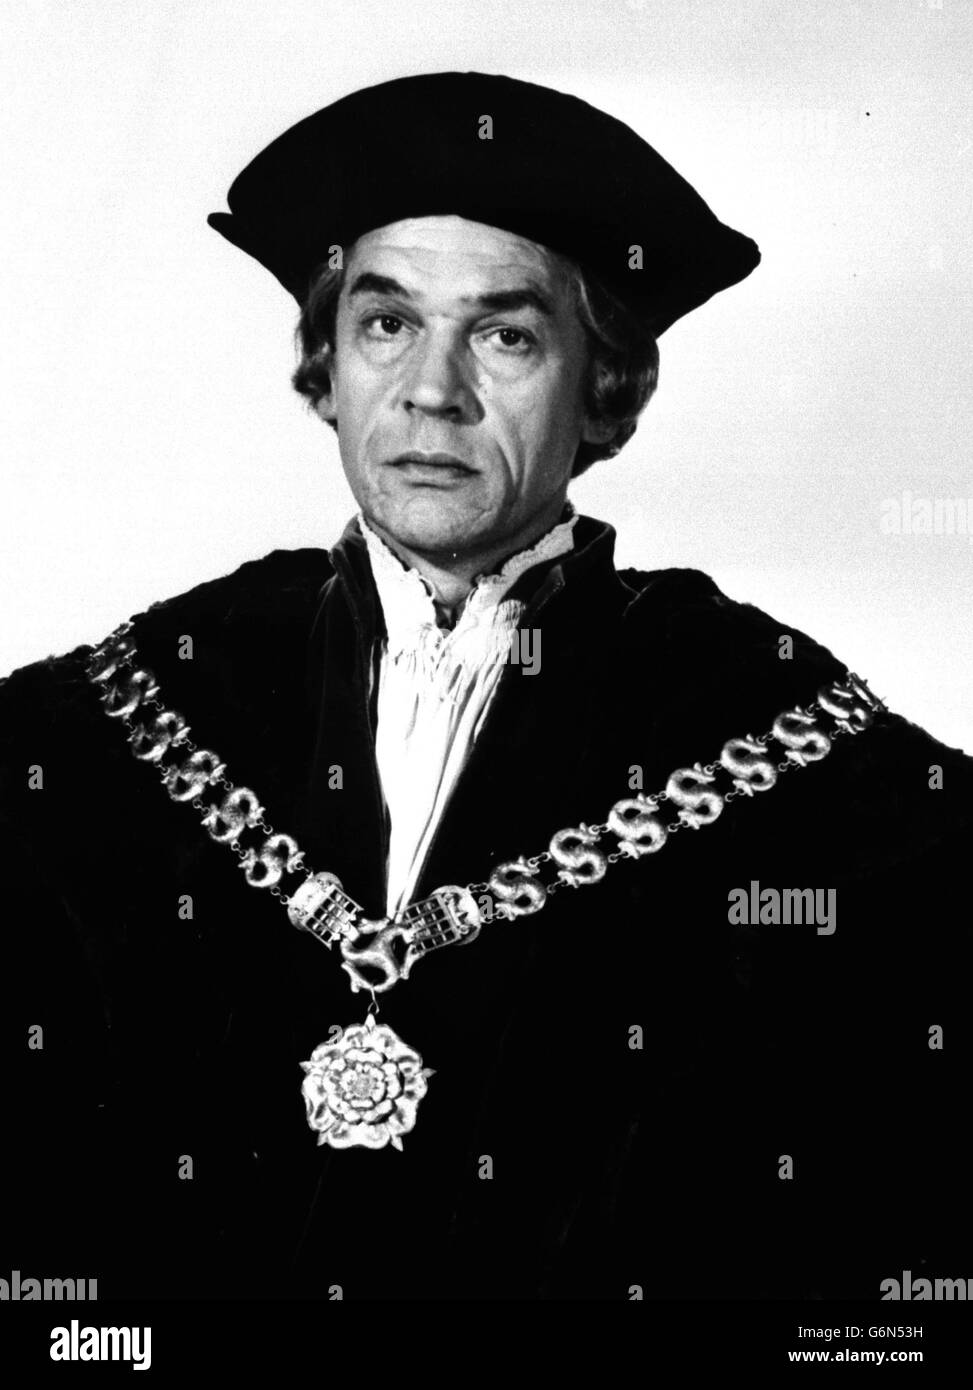 21st January - Born on this Day - 1922 PA NEWS PHOTO 11/4/67 ACTOR PAUL SCOFIELD AS SIR THOMAS MORE IN THE FILM 'A MAN FOR ALL SEASONS'. THE ROLE THAT WON HIM THE ACADEMY AWARD FOR BEST PERFORMANCE BY AN ACTOR. Stock Photo